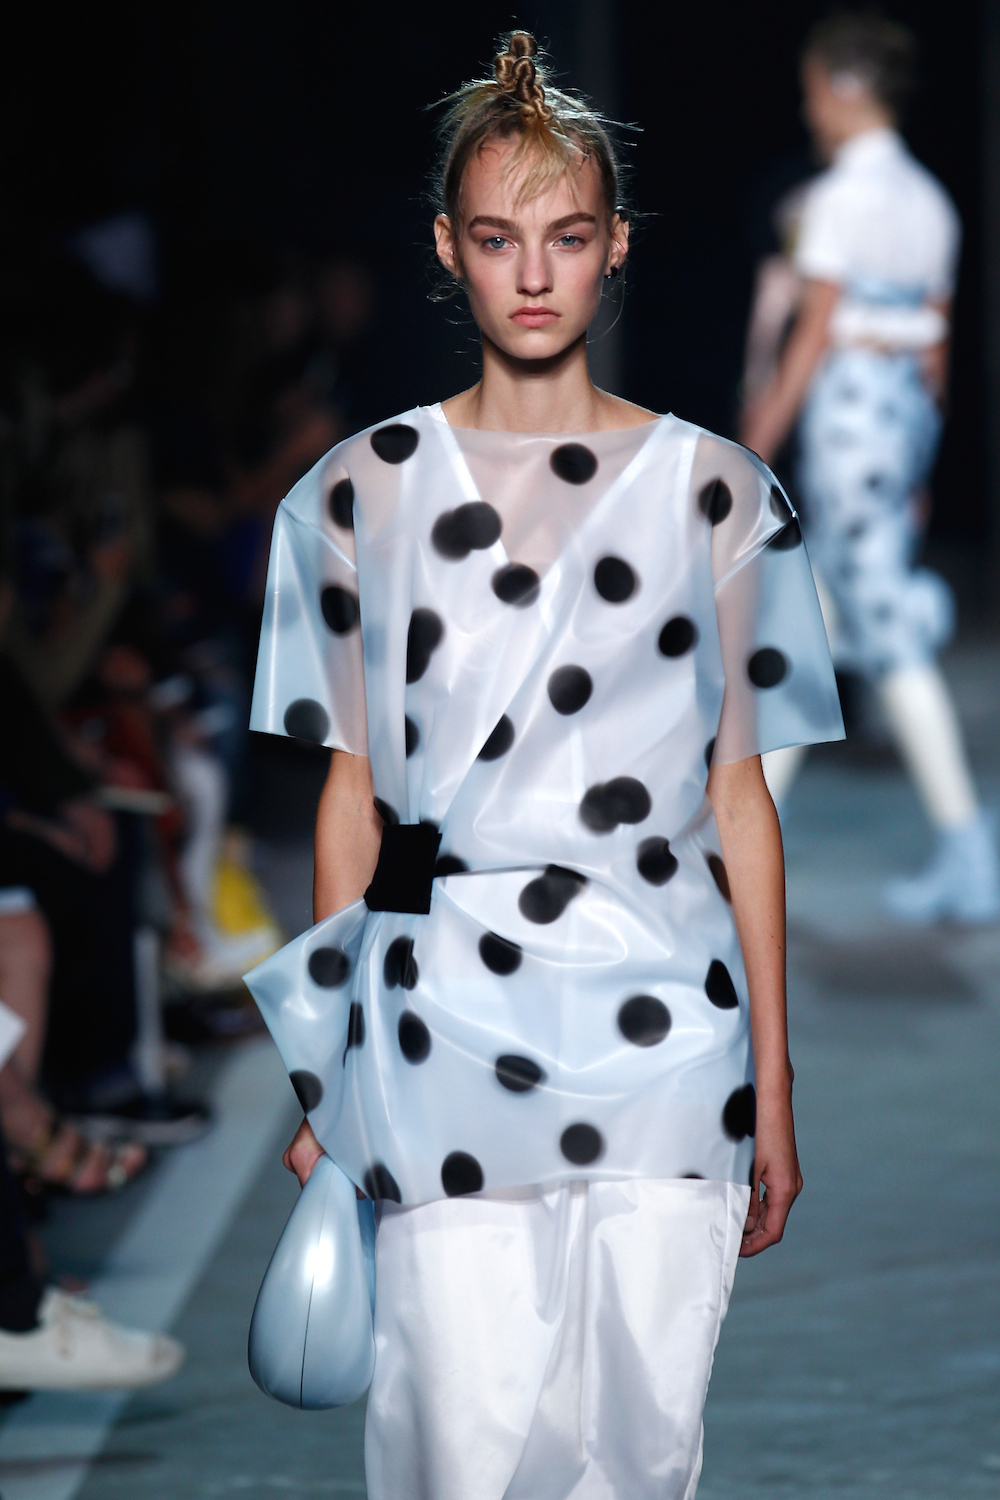 Marc By Marc Jacobs - Runway - Mercedes-Benz Fashion Week Spring 2015